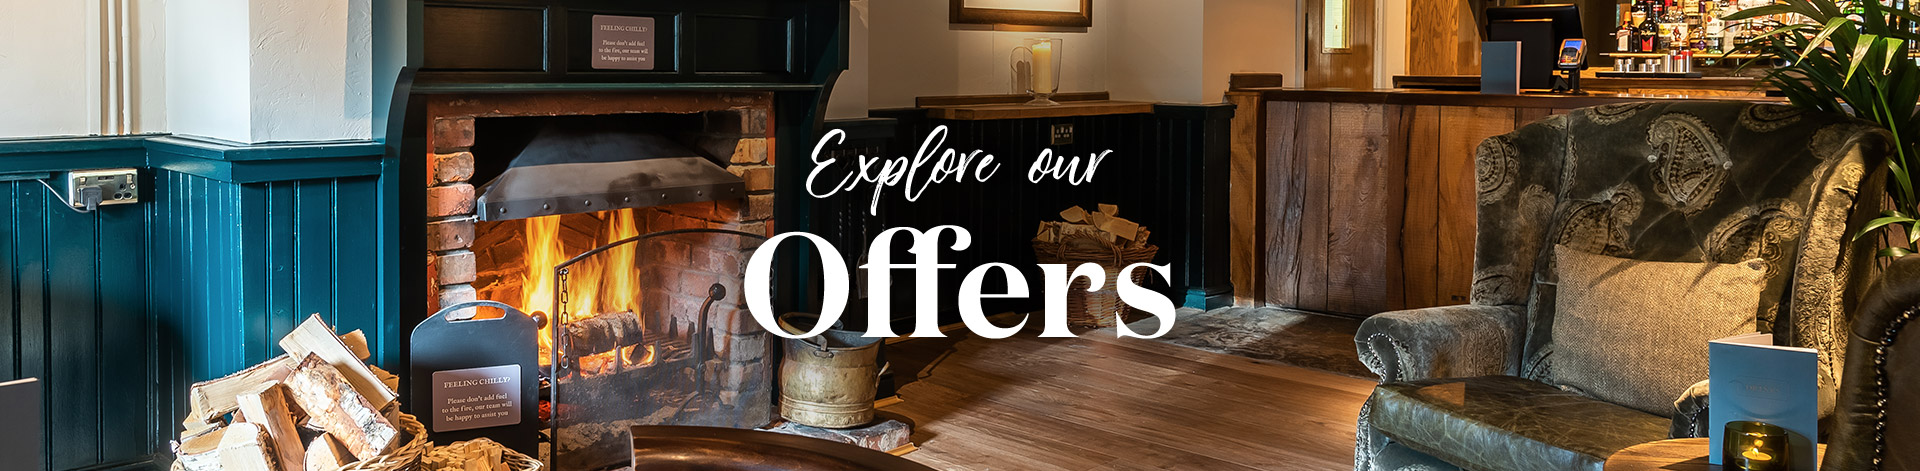 Our latest offers at The Fox House